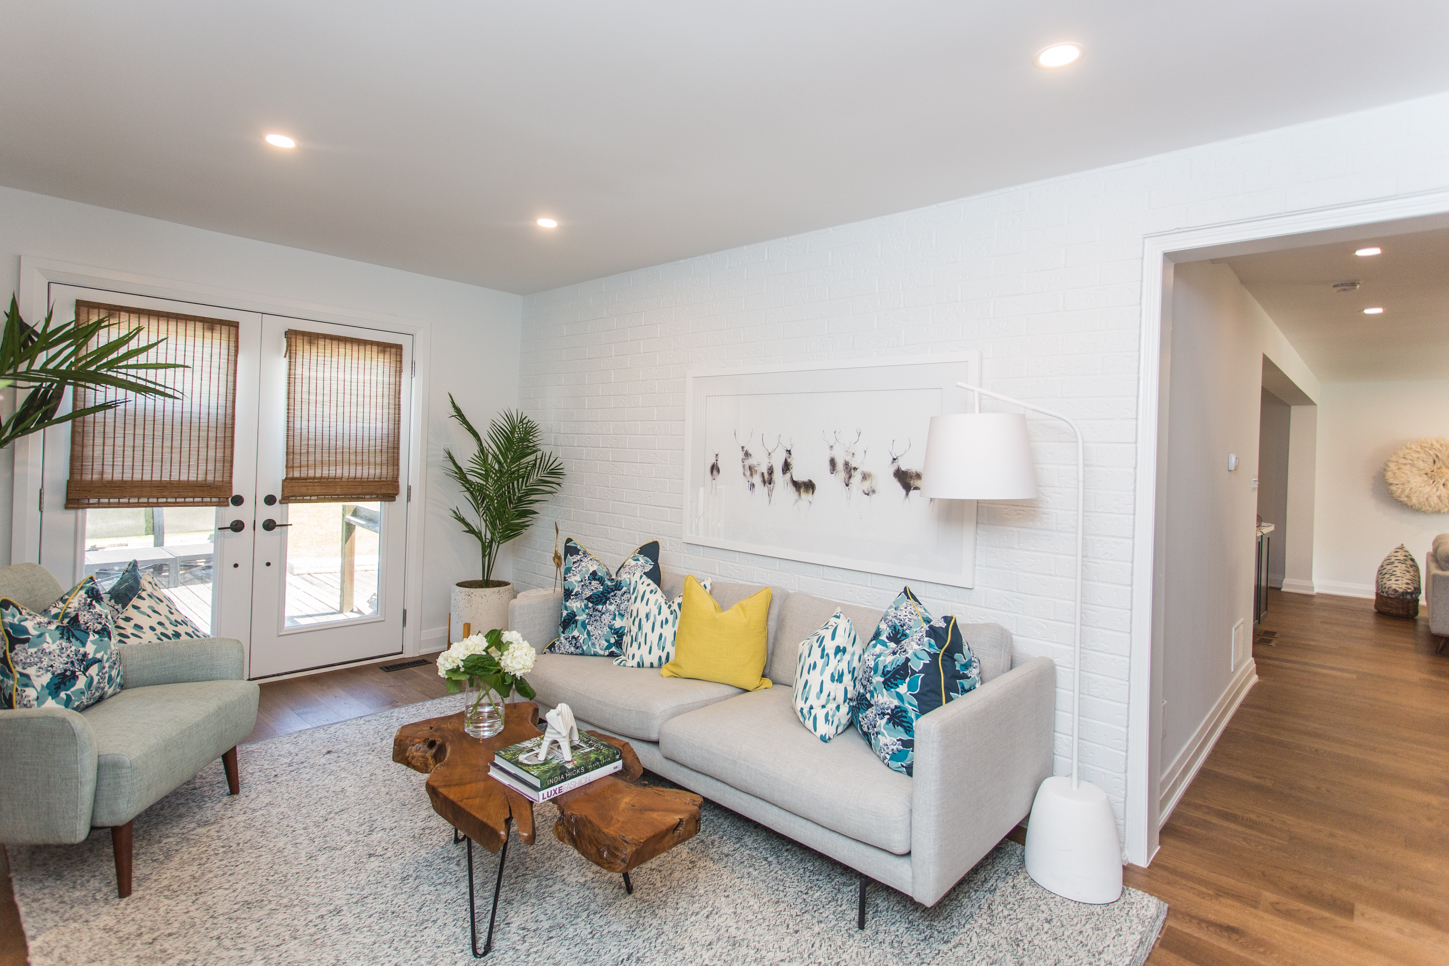 Whitewashing a brick wall saved cash while adding texture and dimension to the space.